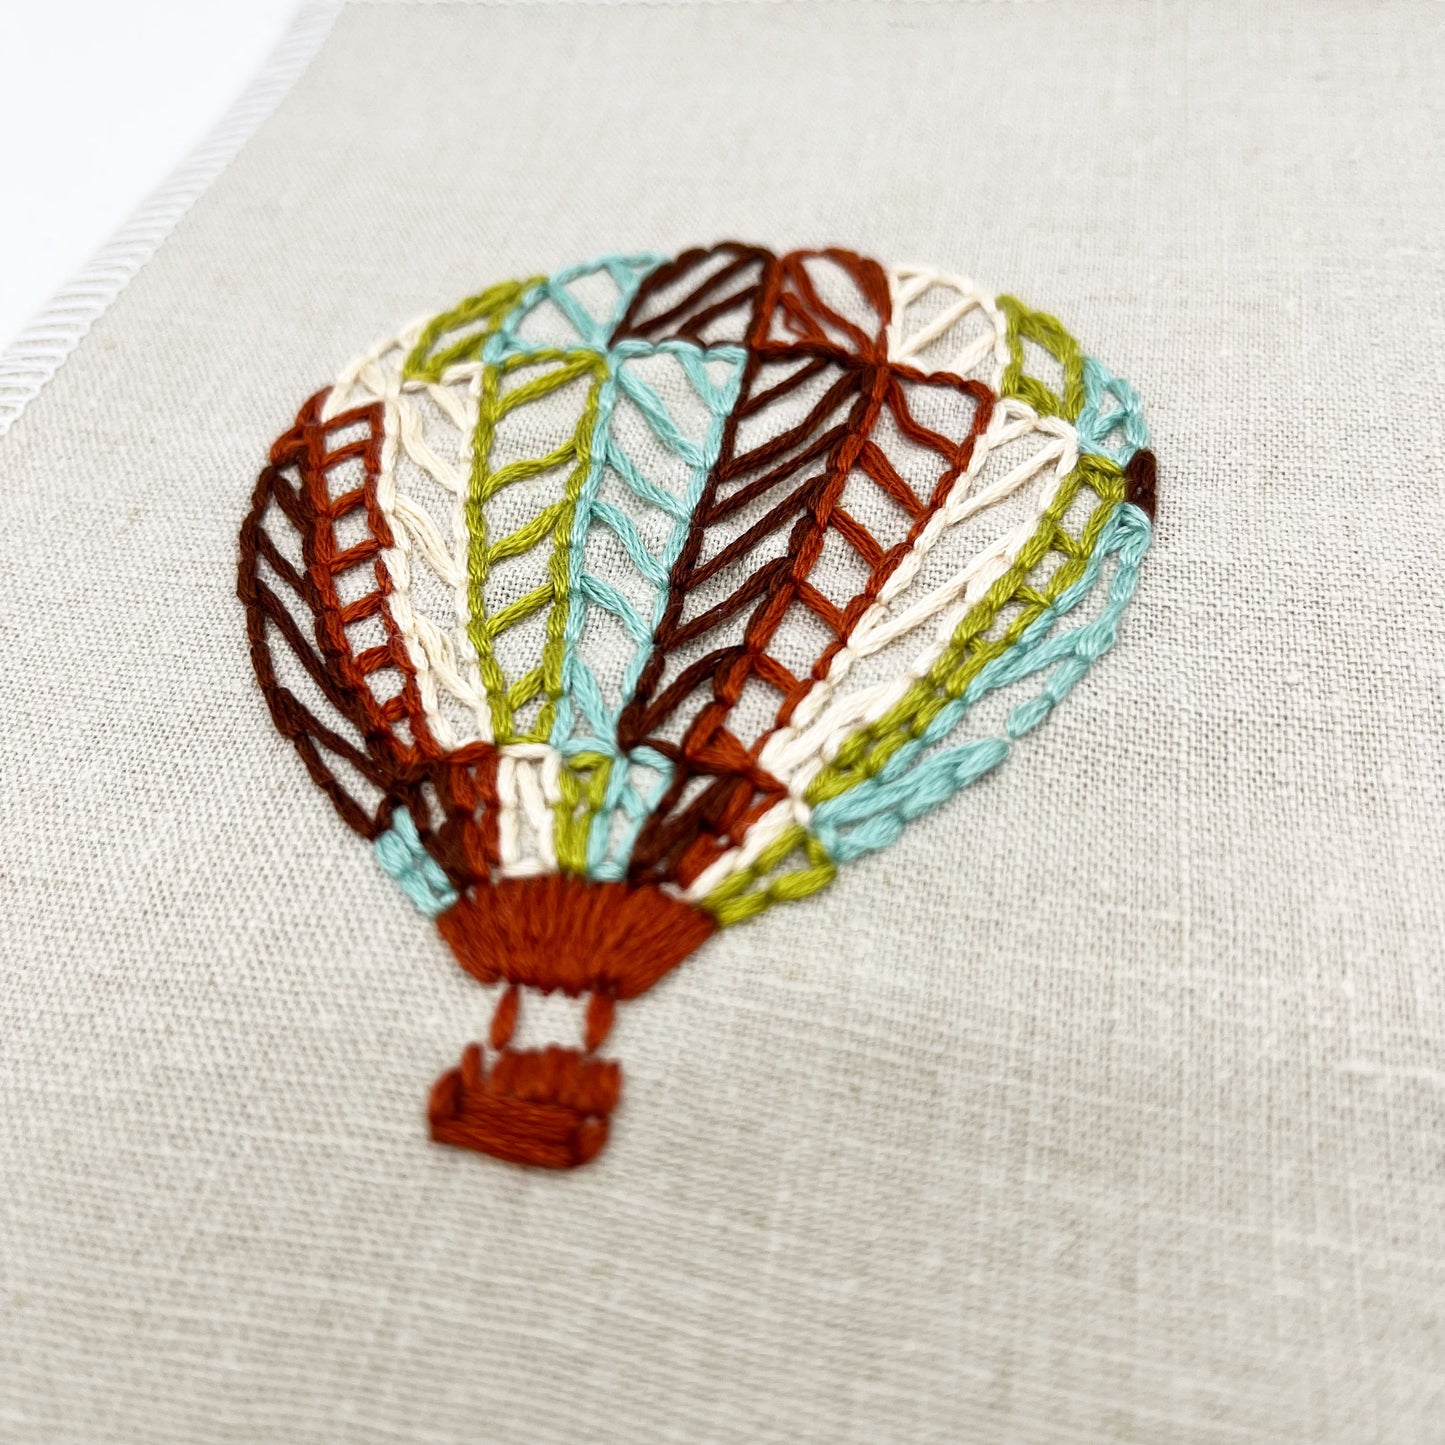 Wall Hanging- Hand Embroidered Hot Air Balloon